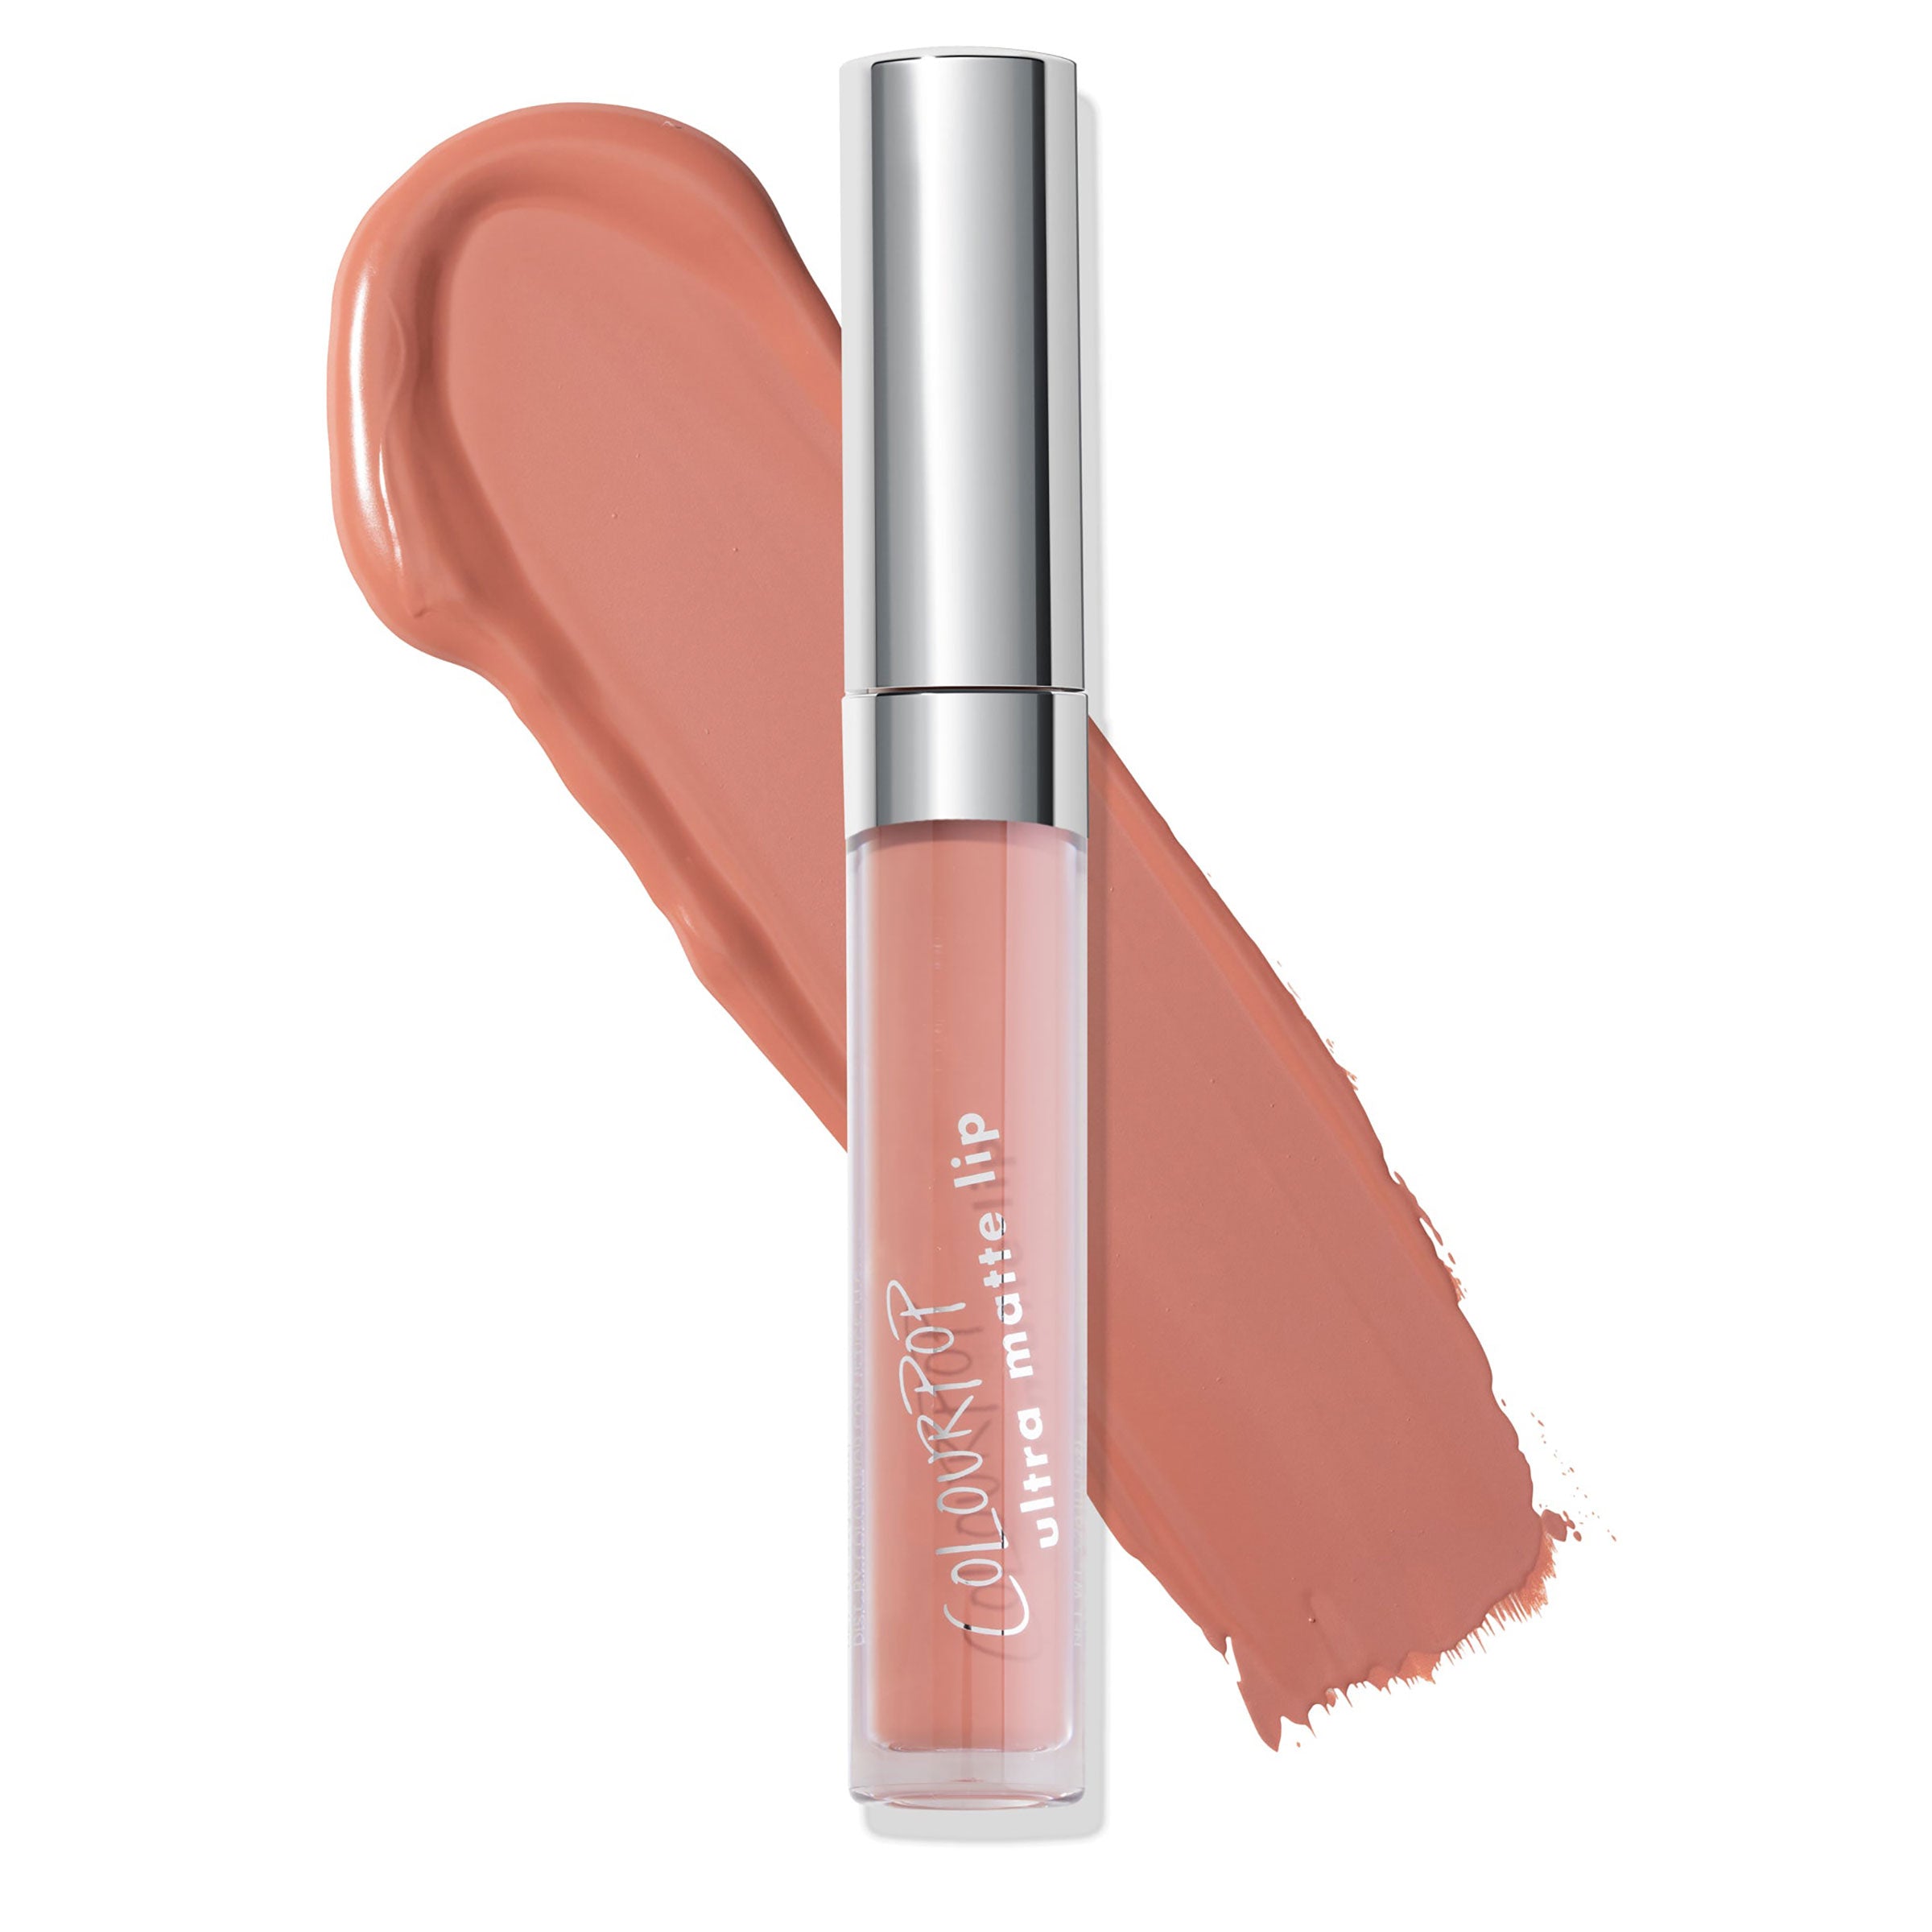 Times Square muted pink beige Ultra Matte Lipstick